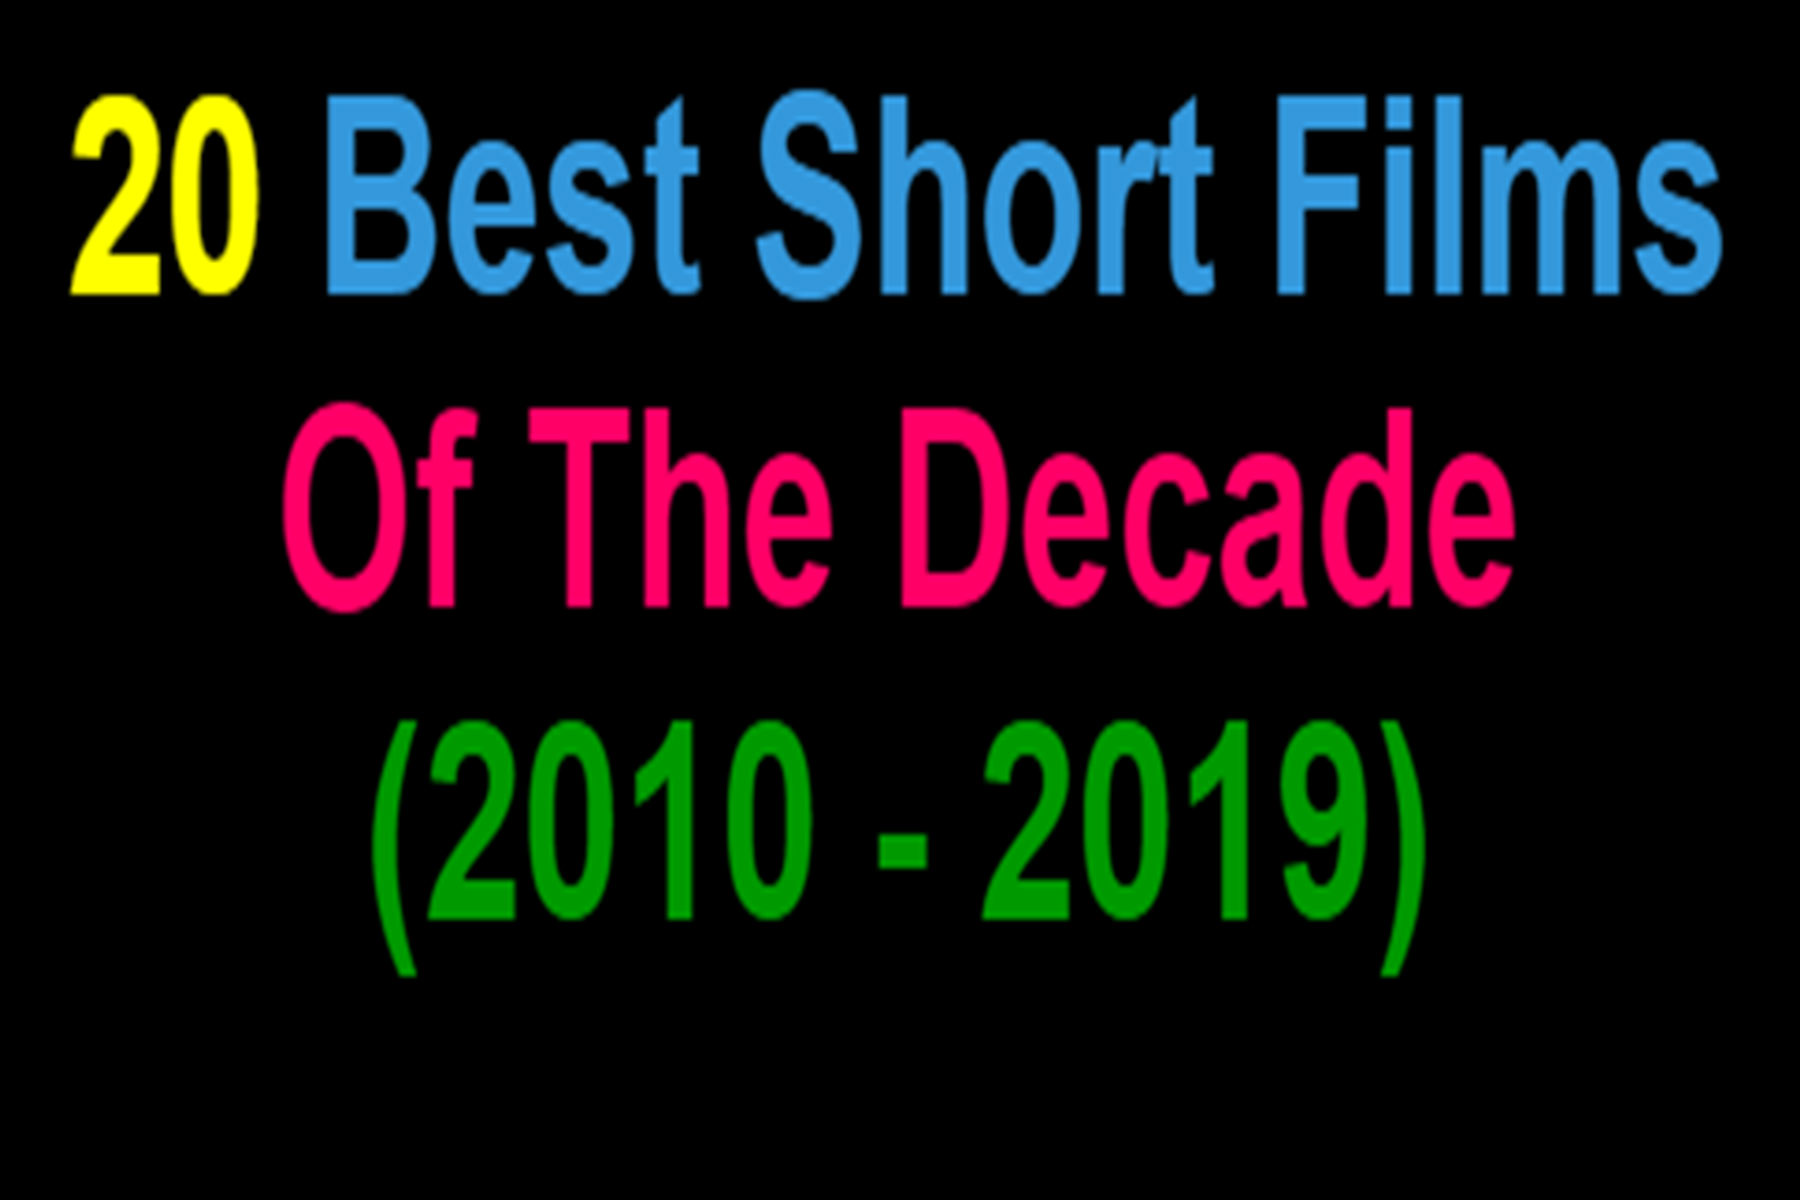 The 20 Best Short Films Of The Decade